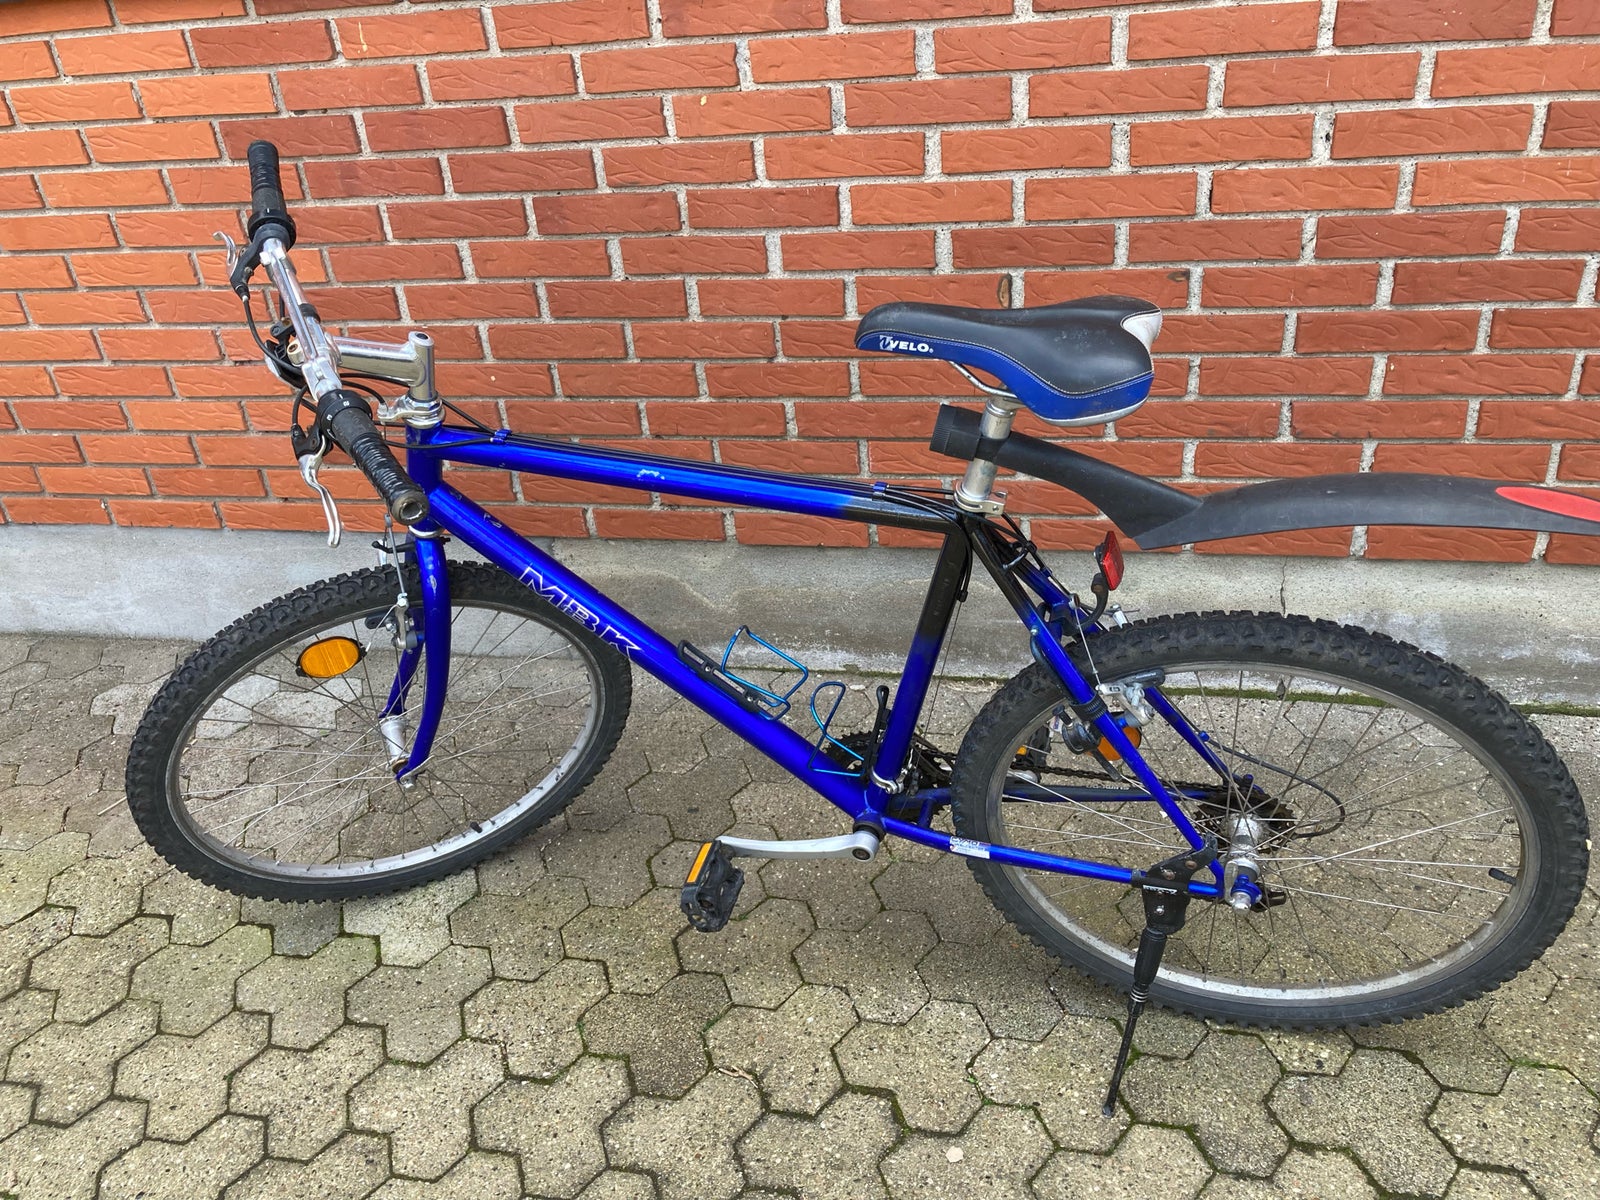 MBK, anden mountainbike, 52 tommer